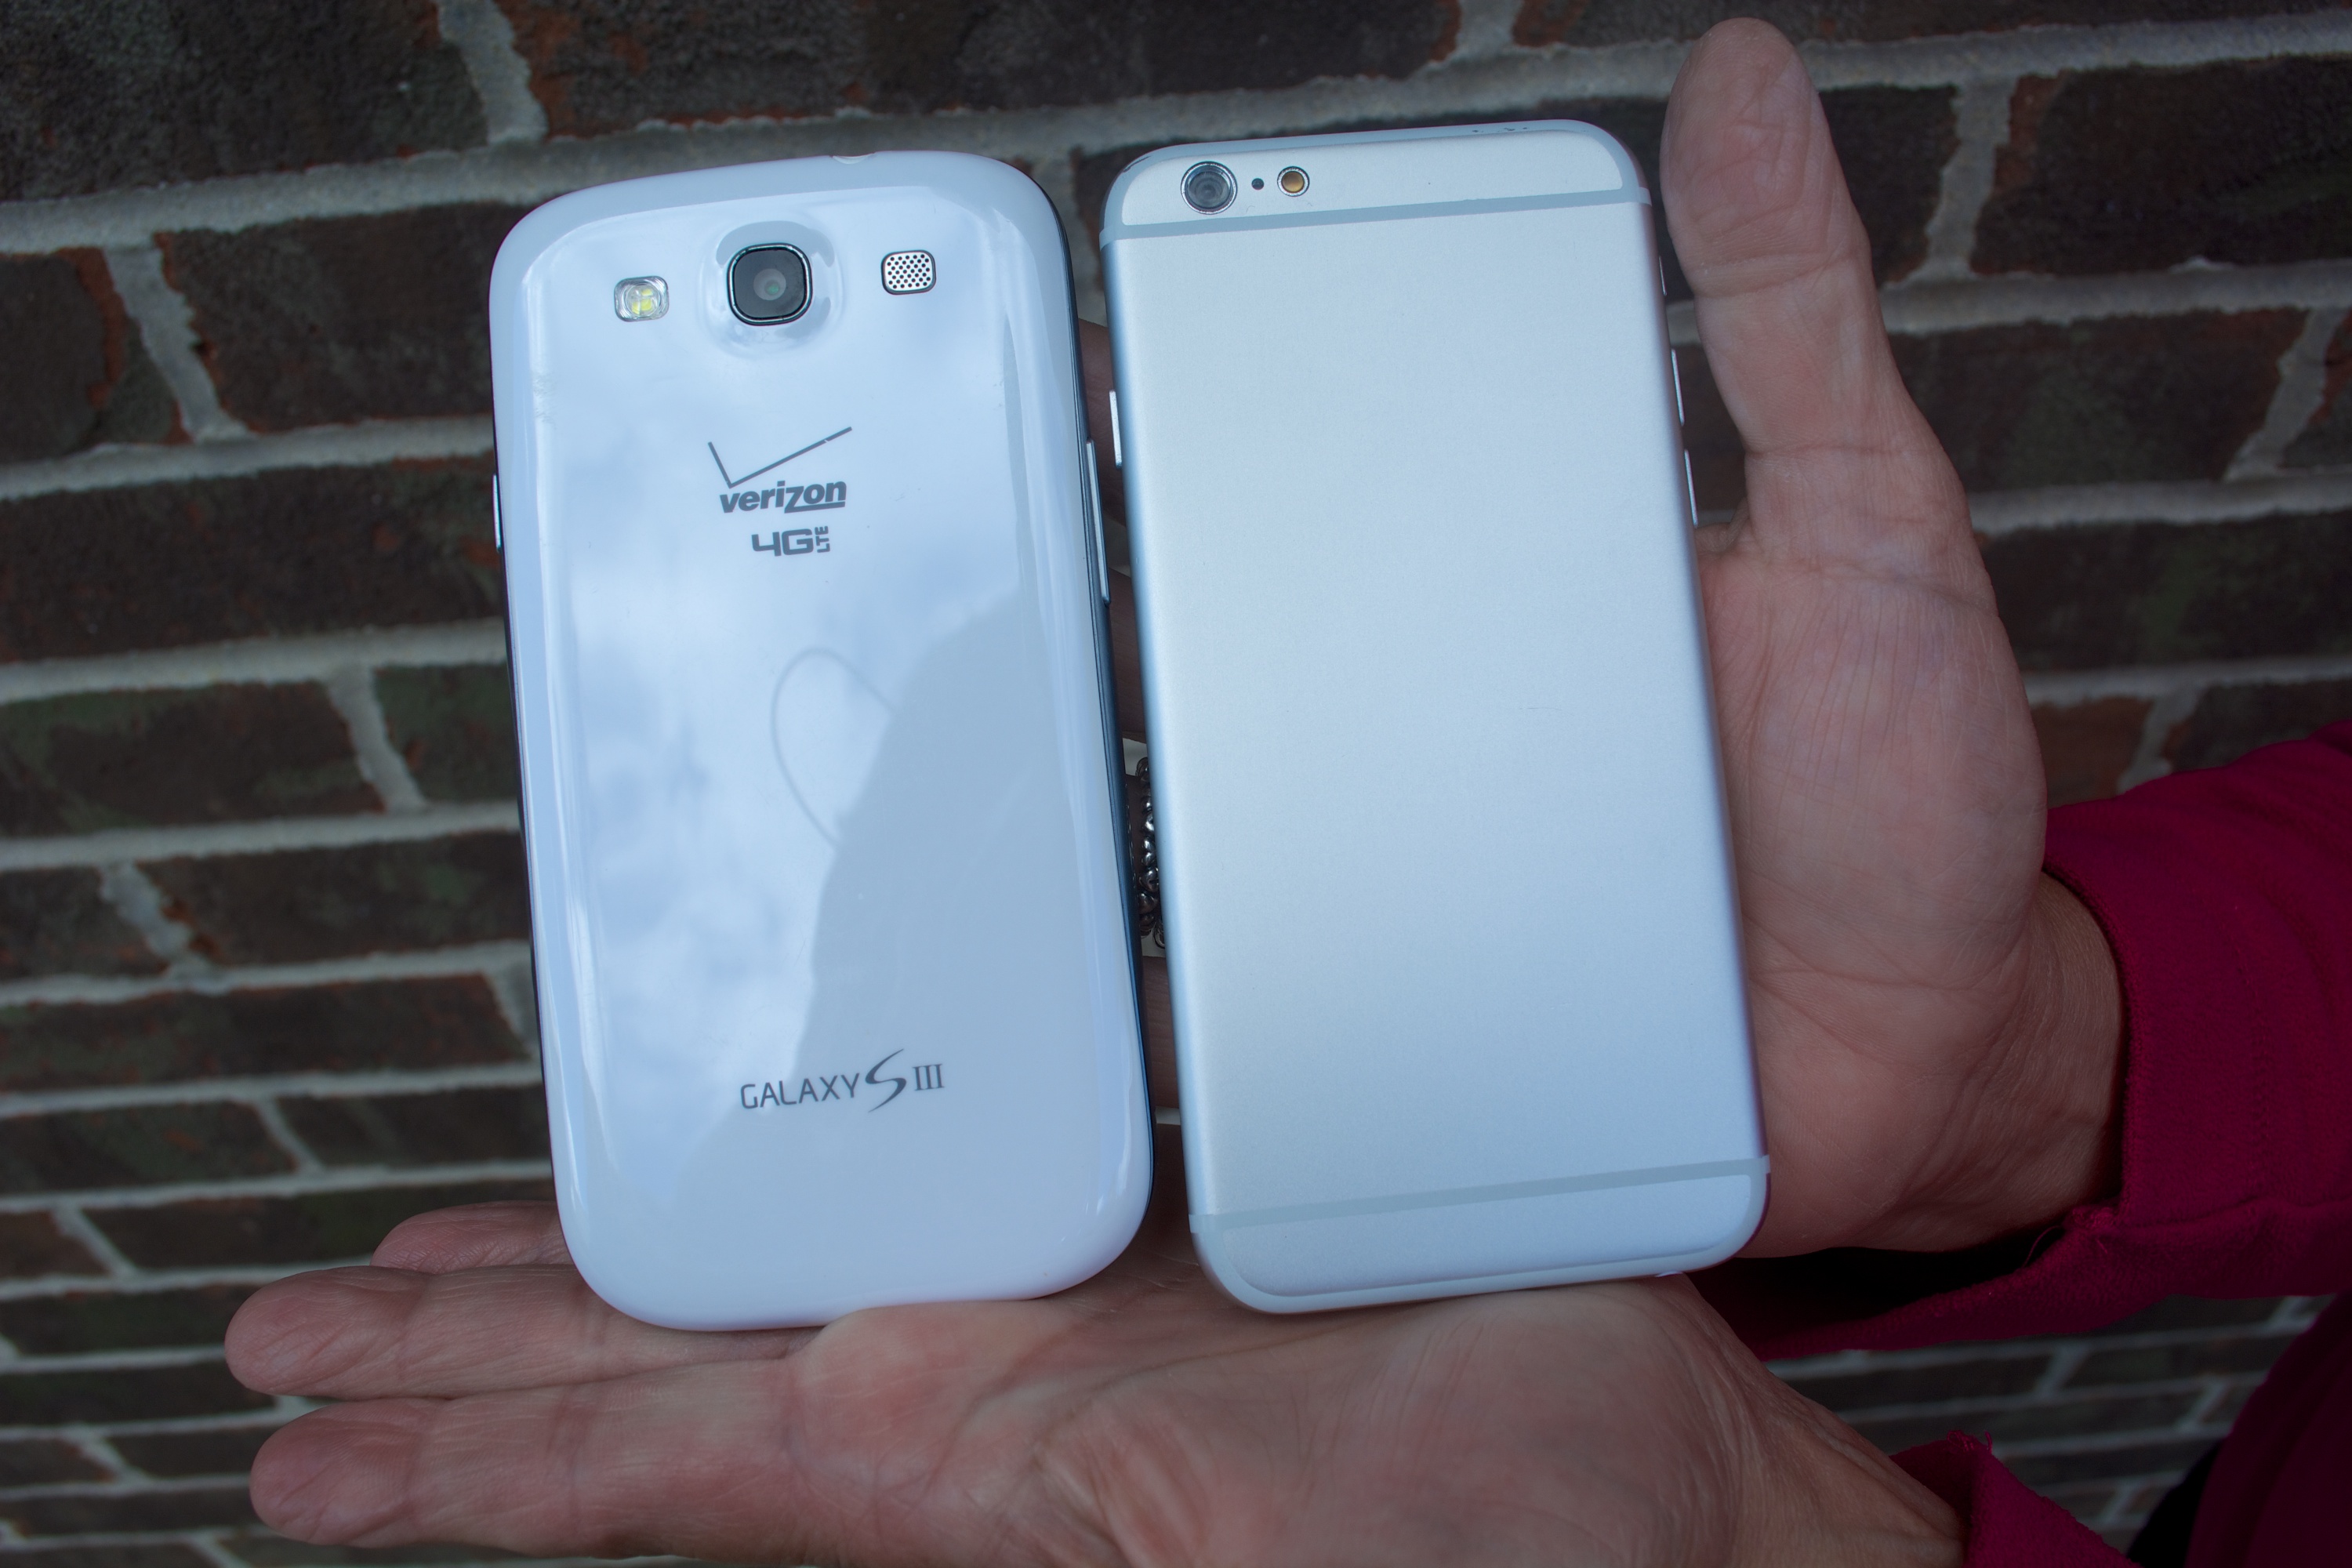 Read on to see how these two devices stack up in our iPhone 6 vs Galaxy S3 comparison.